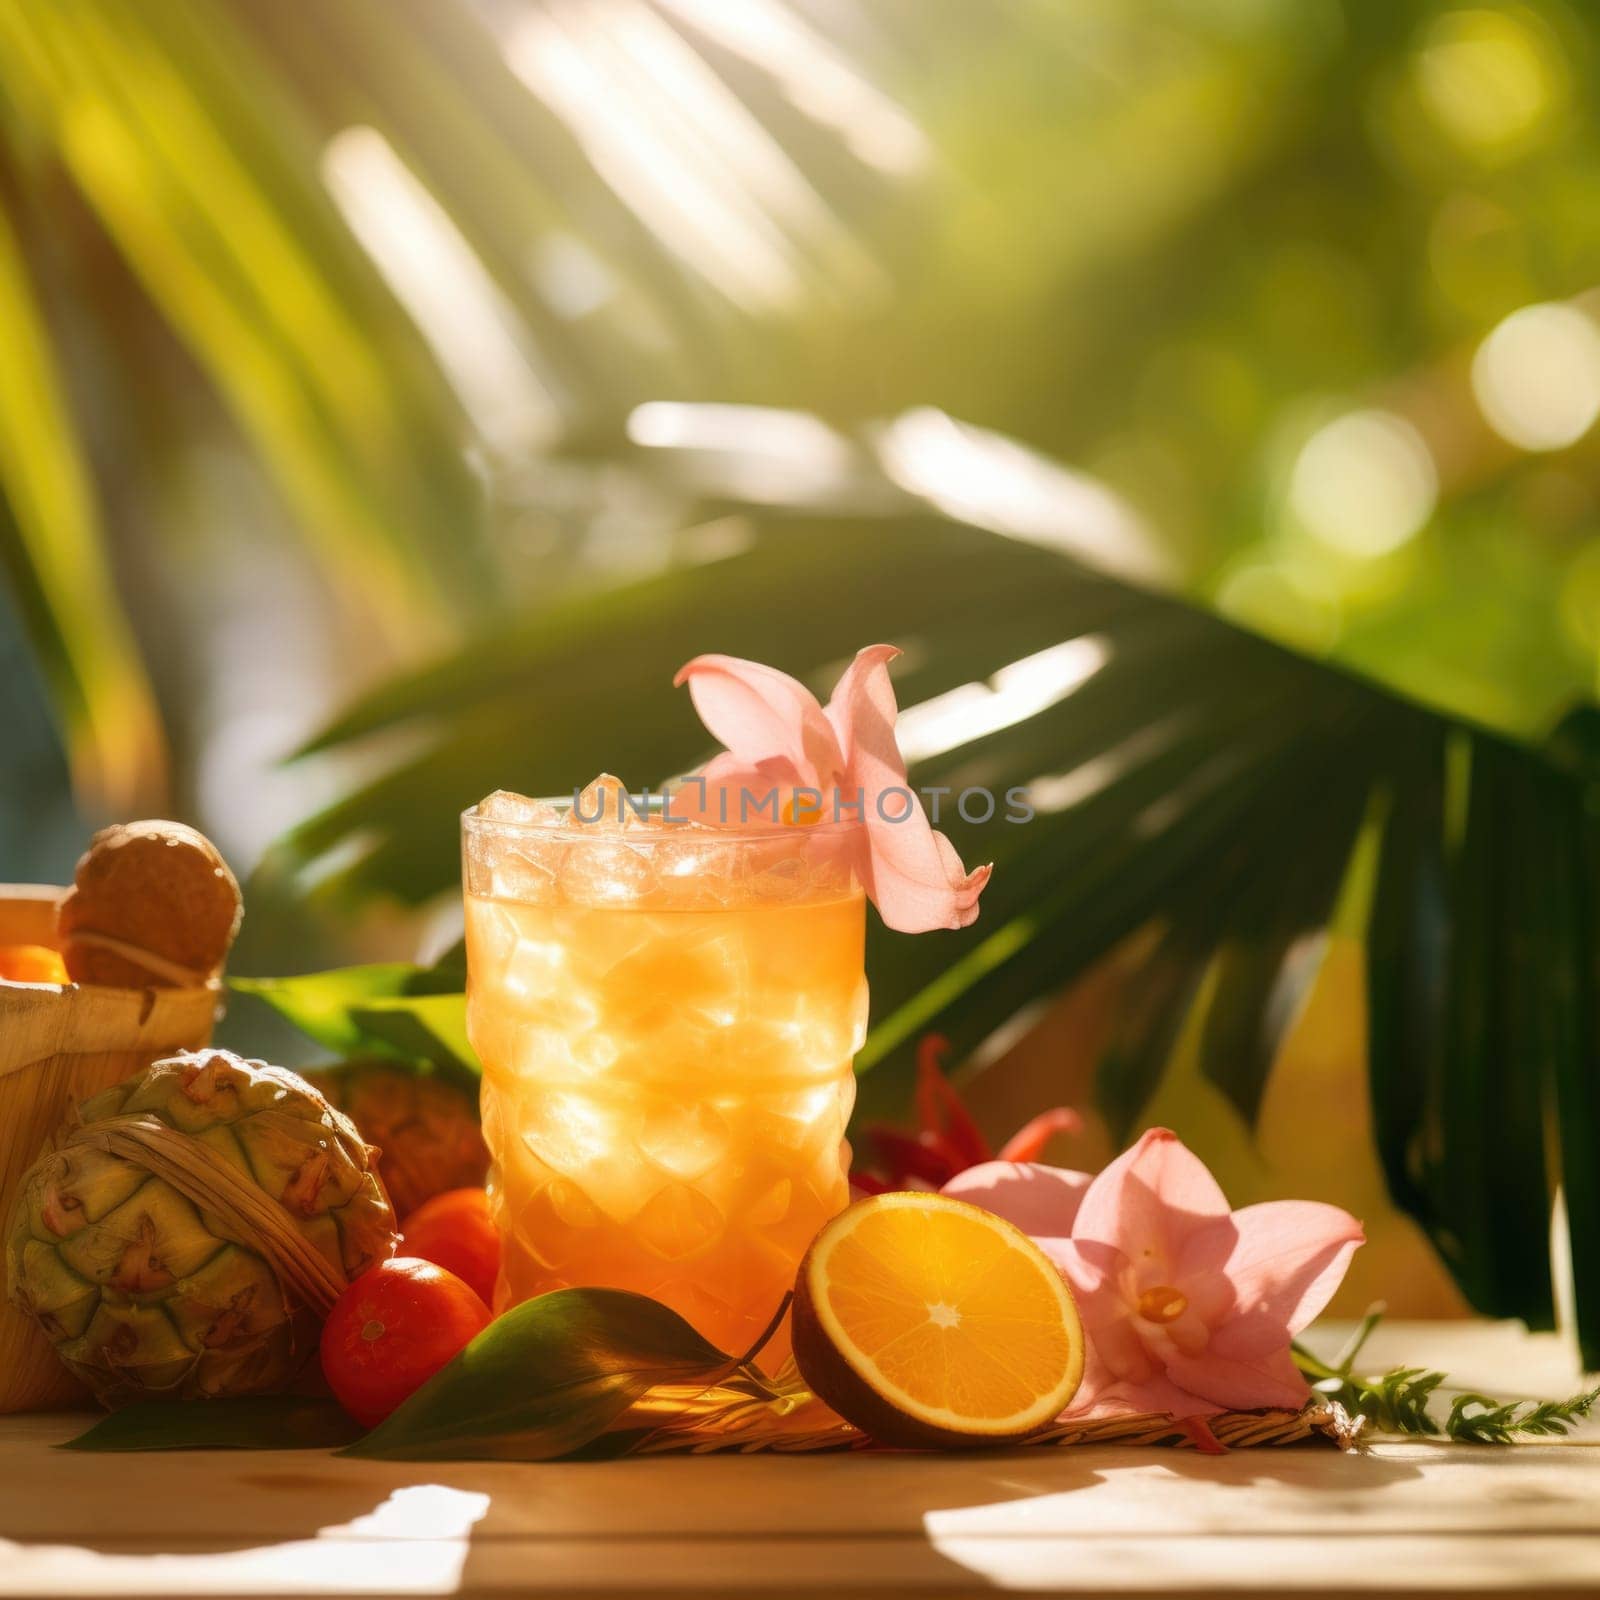 A tropical drink with orange slices and flowers